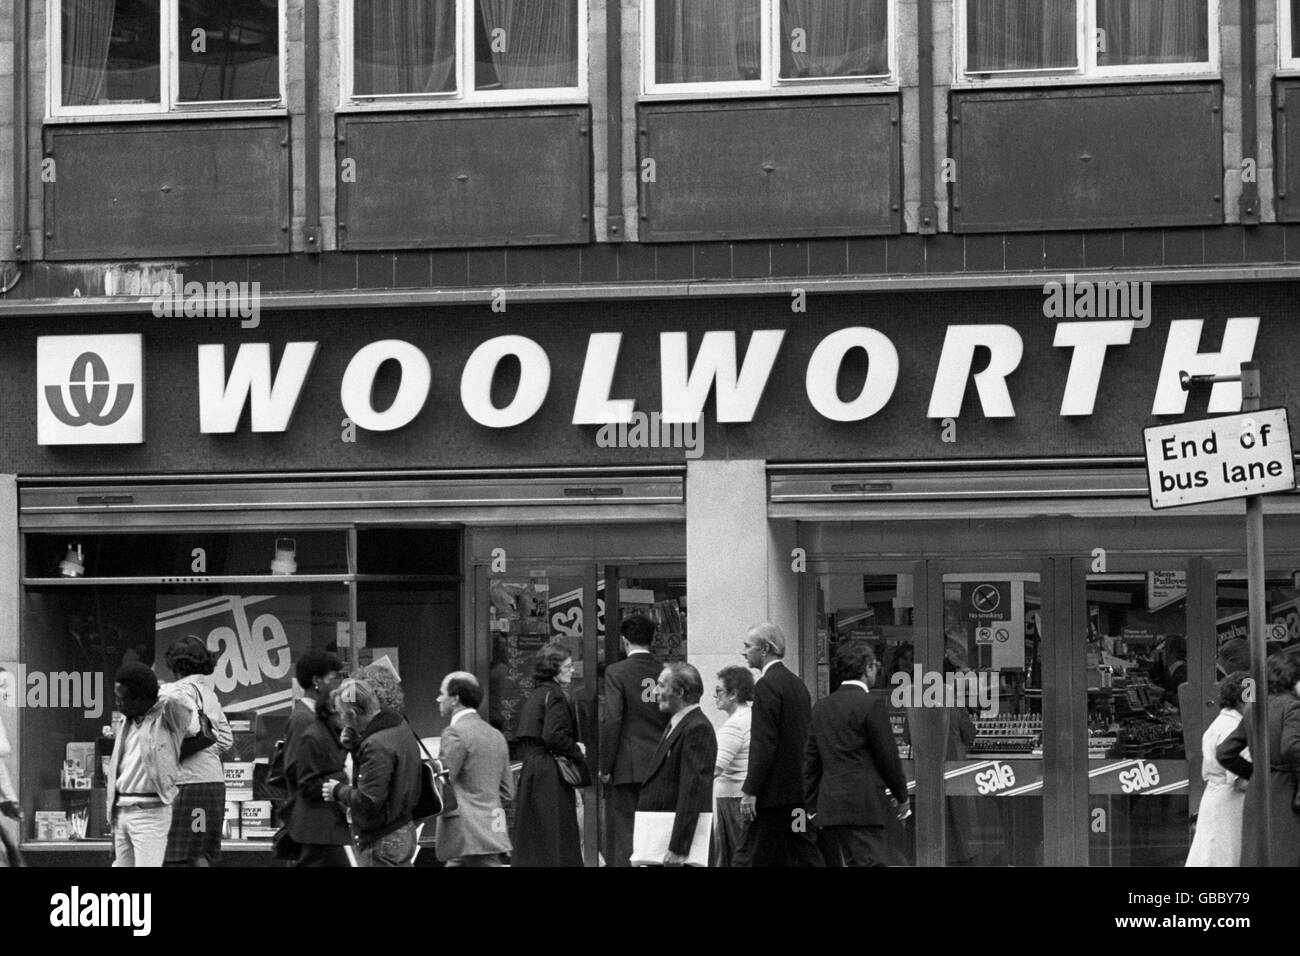 Economy, Retail, Woolworths, 1982. 310 million takeover bid for the Woolworth High Street chain. Stock Photo